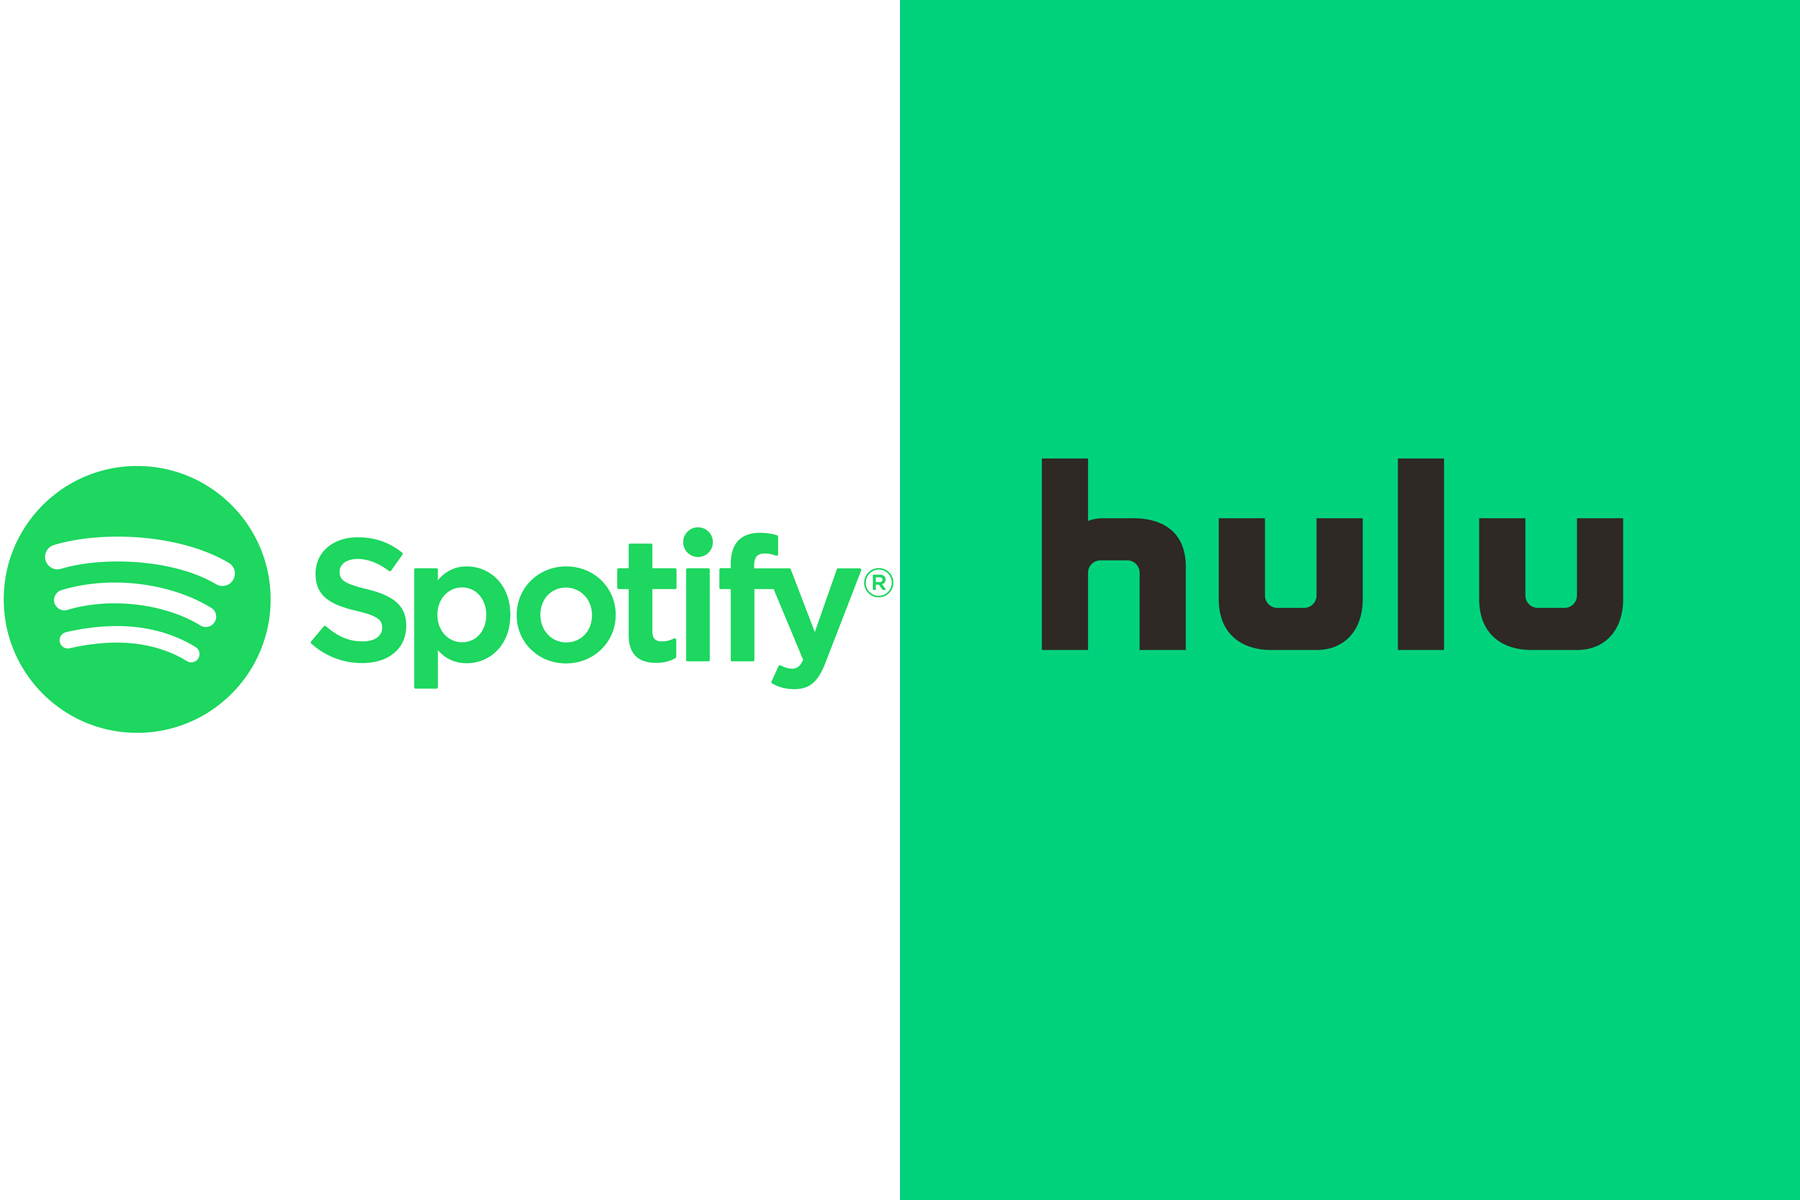 I Have Hulu Can I Get Spotify Free